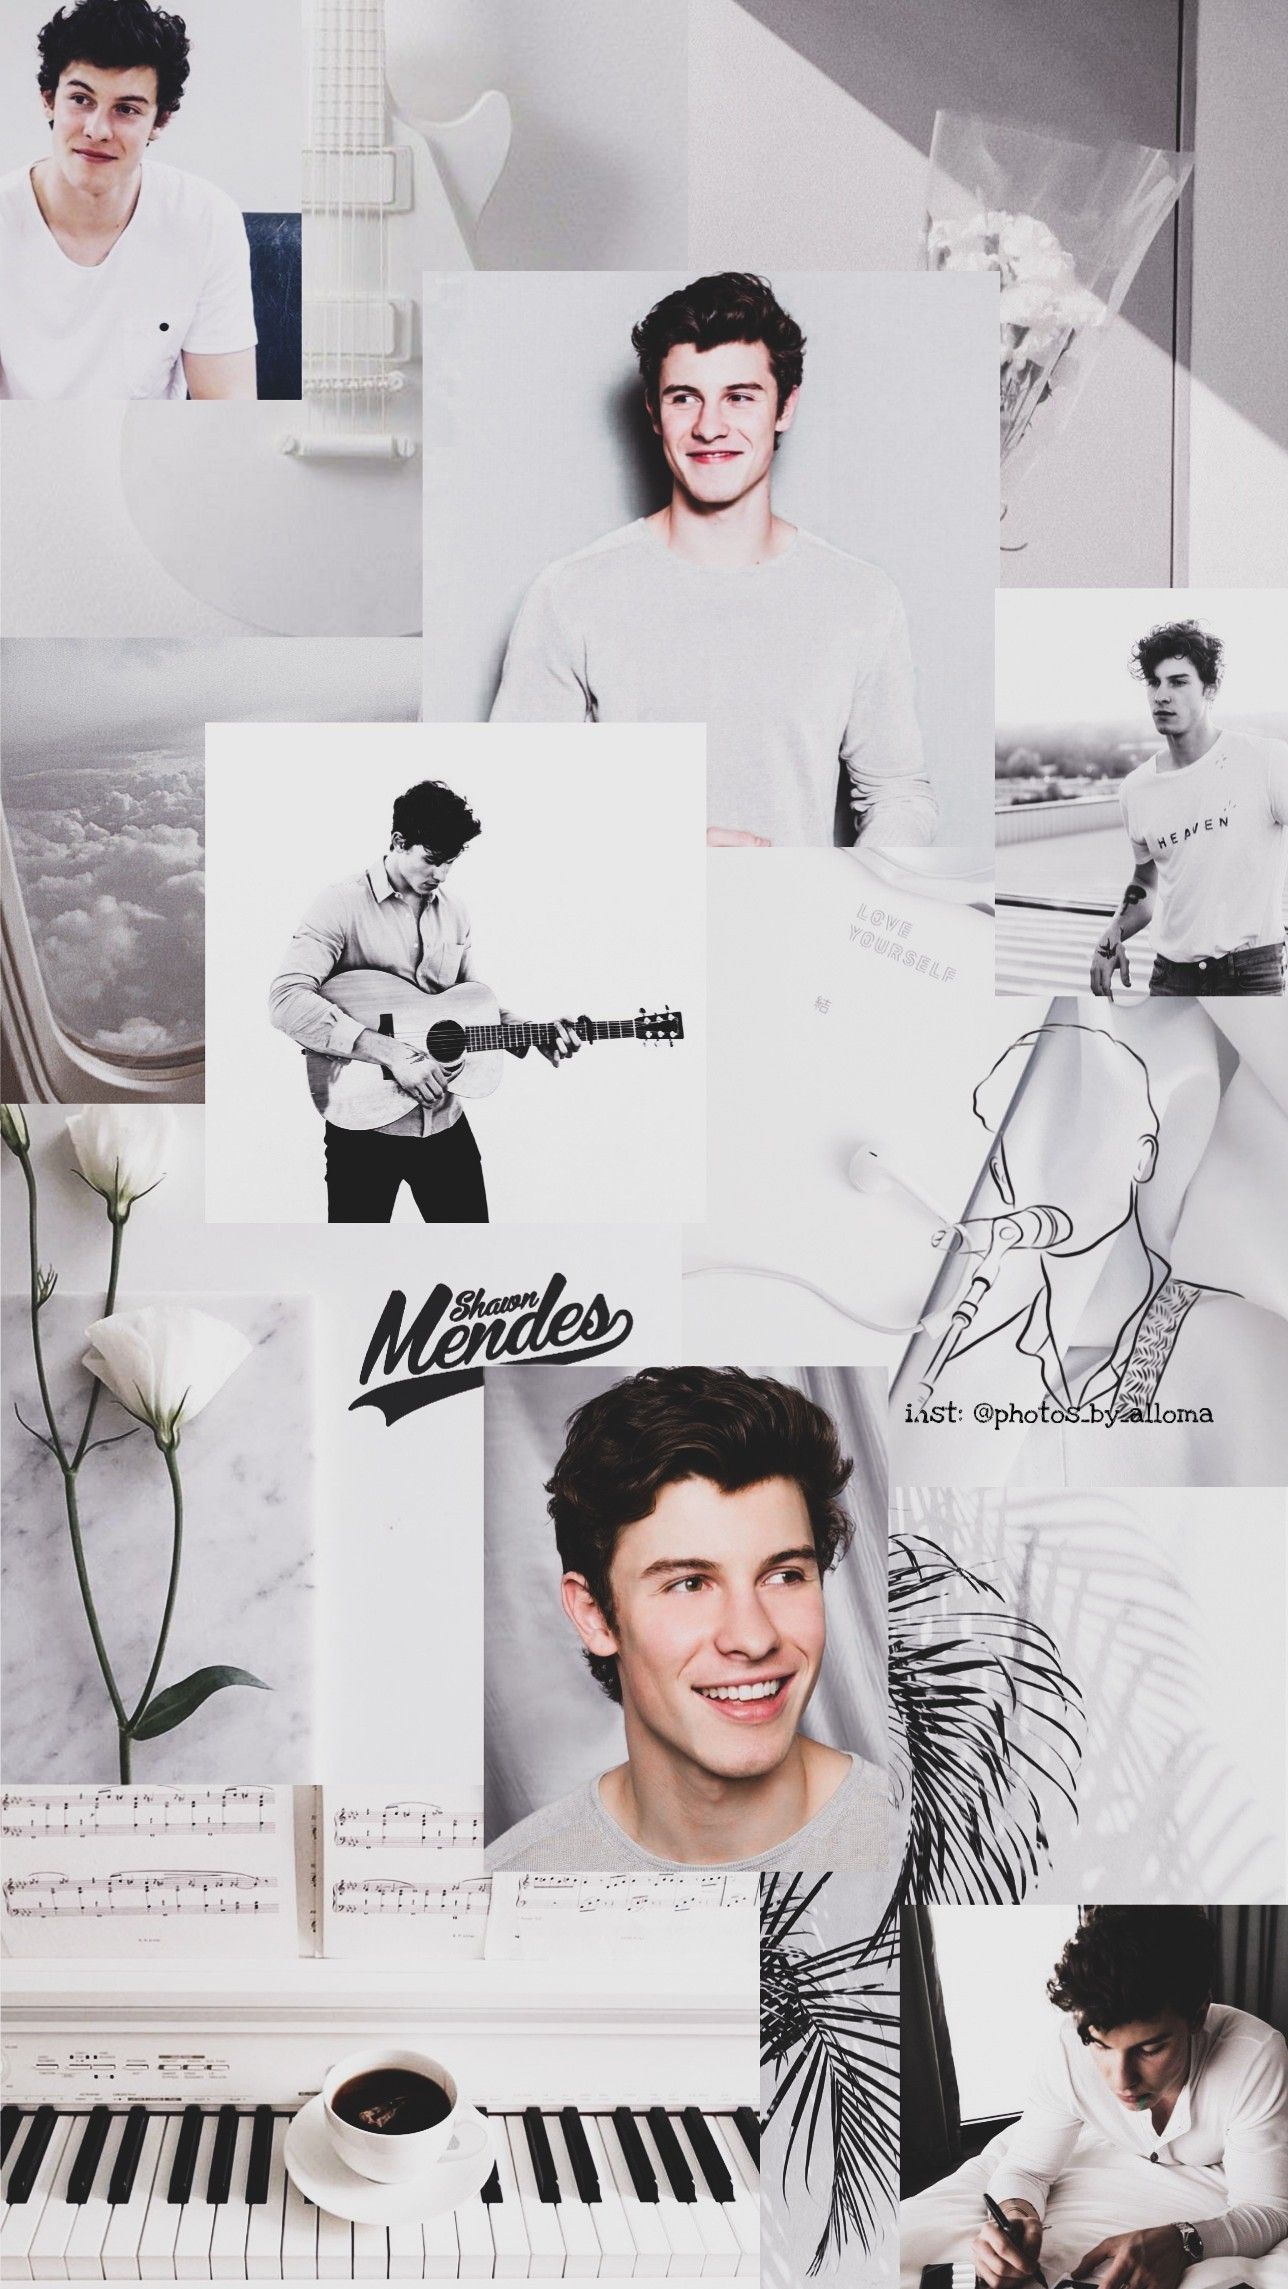 Shawn Mendes white aesthetic wallpaper. Shawn mendes wallpaper, Shawn mendes, Shawn mendes lockscreen